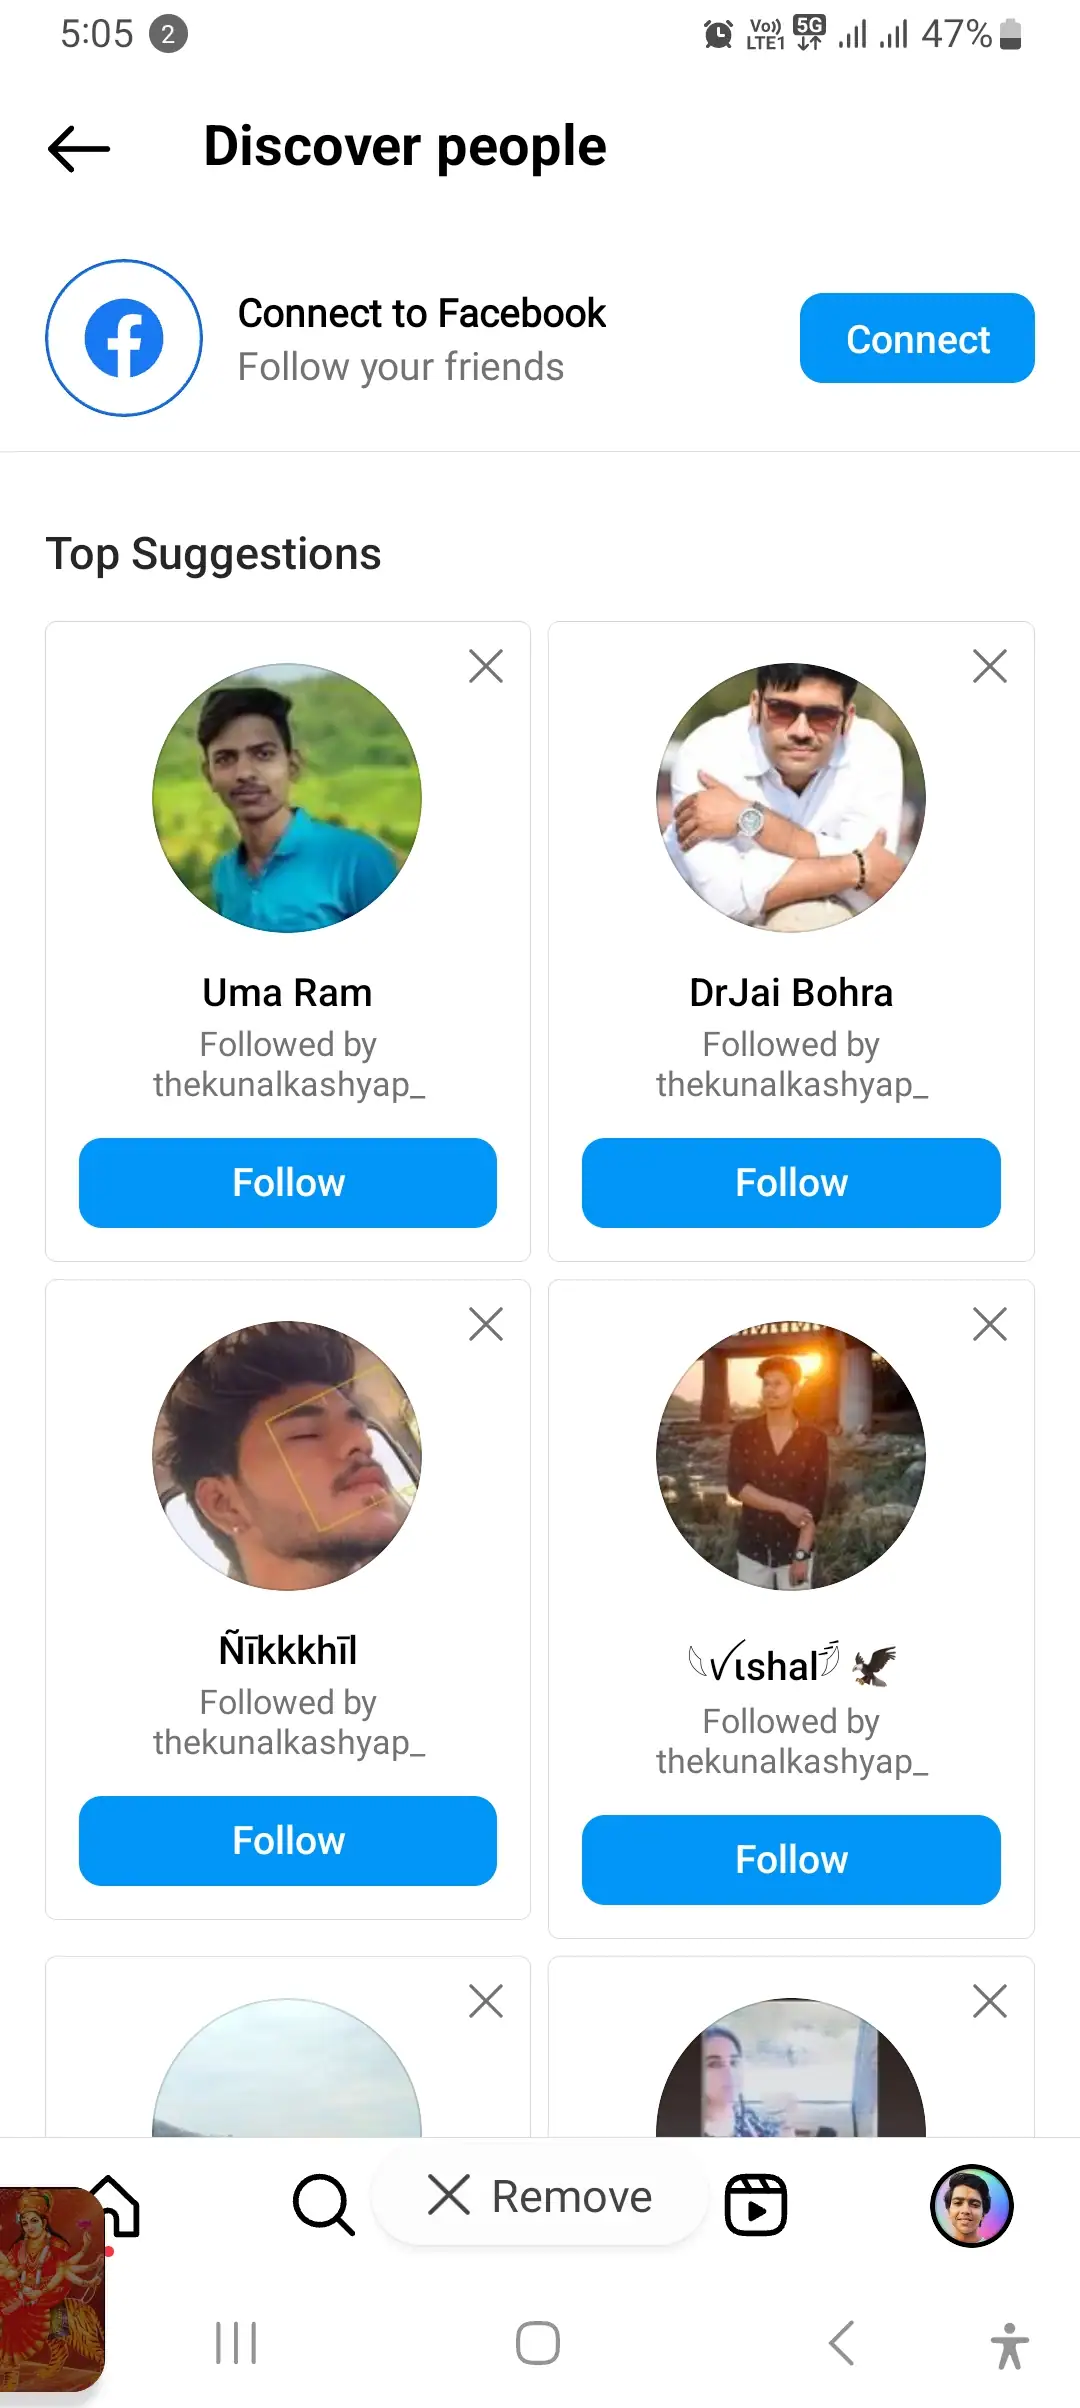 instagram discover people feed of contacts